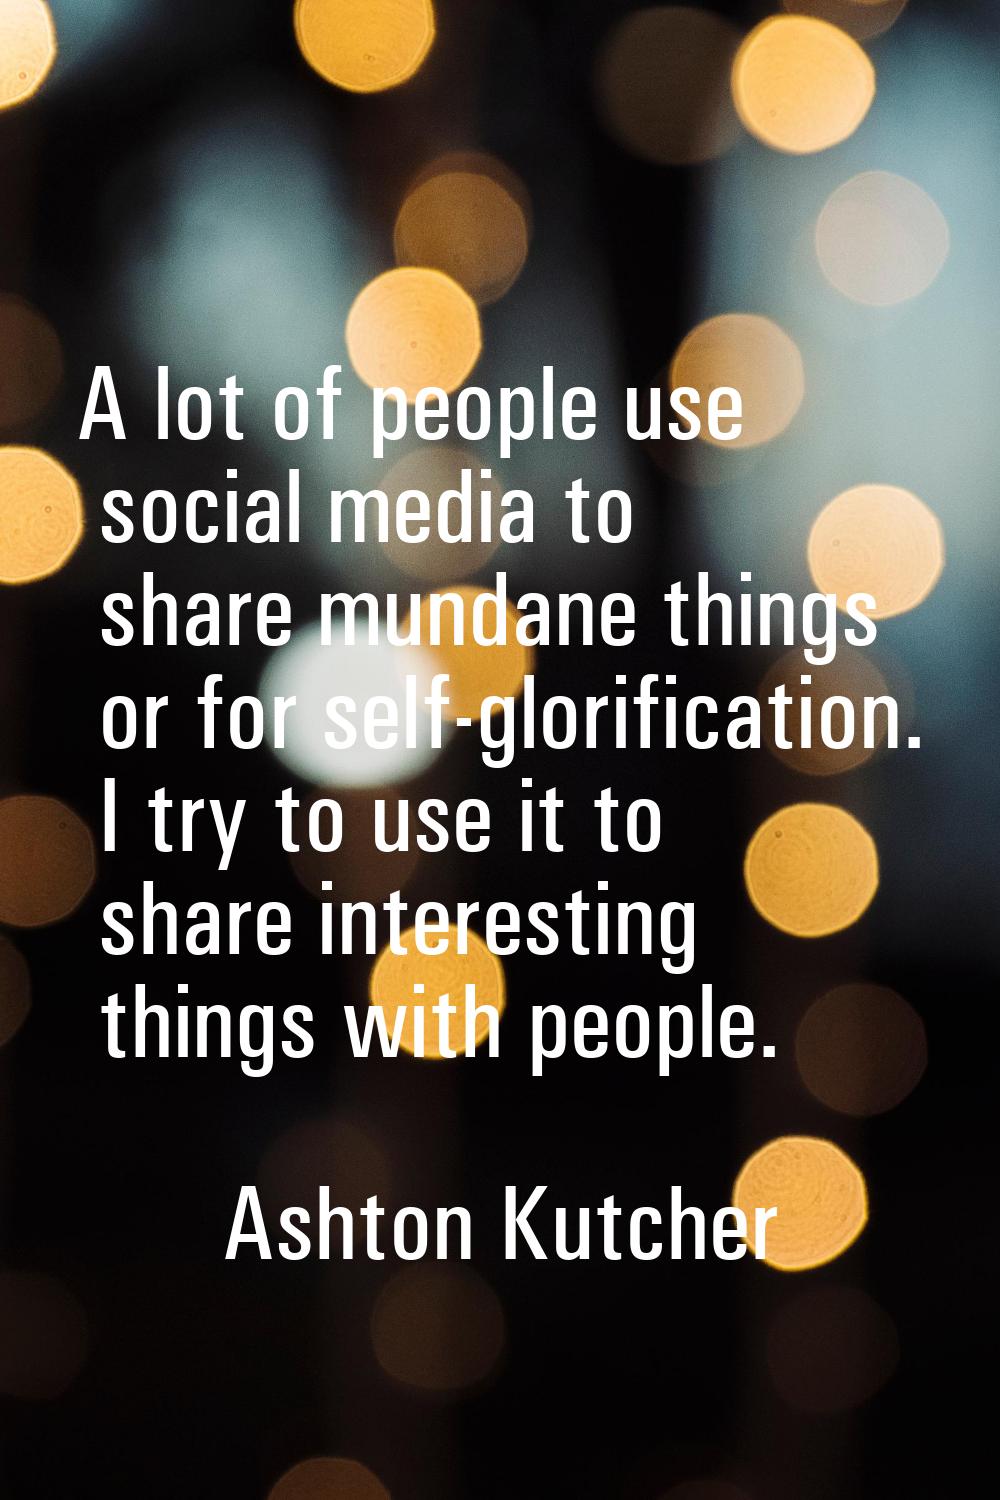 A lot of people use social media to share mundane things or for self-glorification. I try to use it